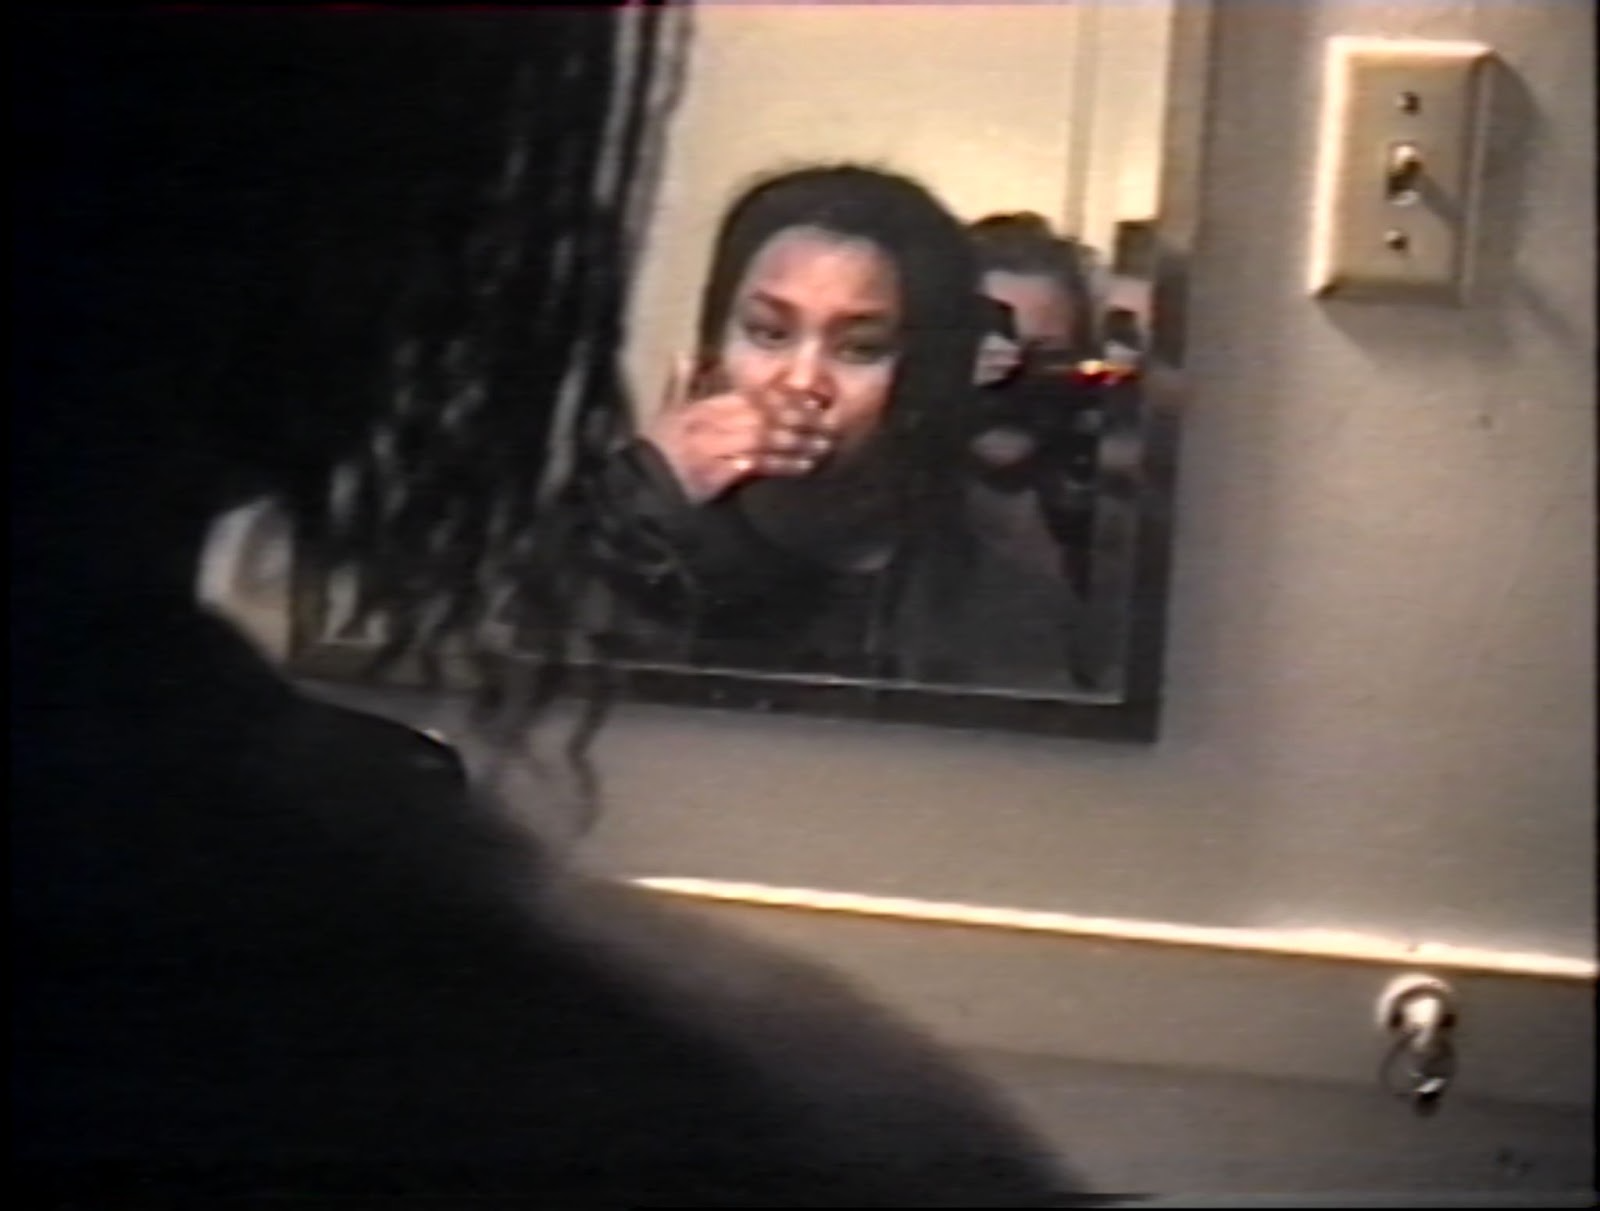 VHS still frame looking over the shoulder of someone in her early 20s with shoulder length dark hair into the mirror reflection where her hand is covering her mouth. A second person in her early 20s is visible in the mirror with a camcorder in front of her face.